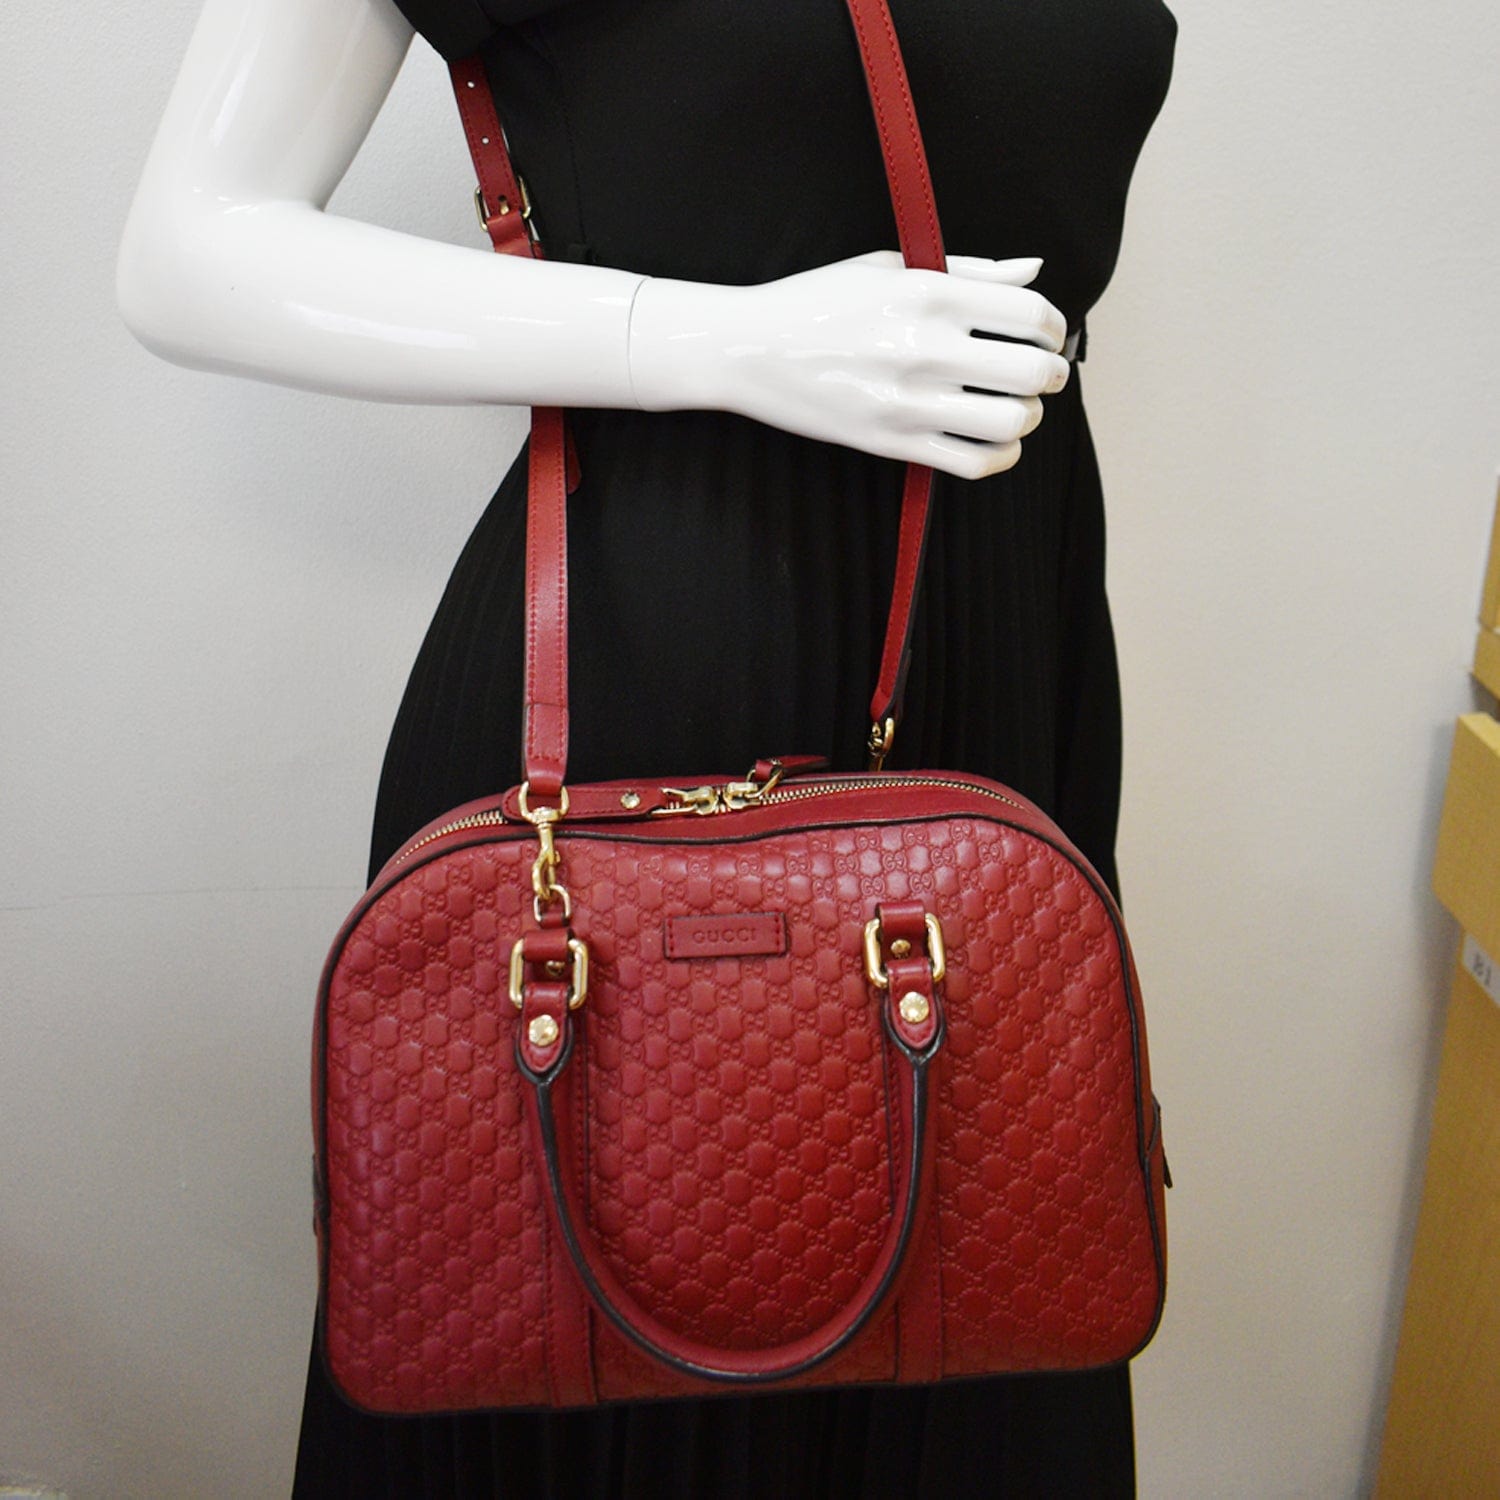 Gucci Microguccissima Small Leather Crossbody Bag Navy Red 510286